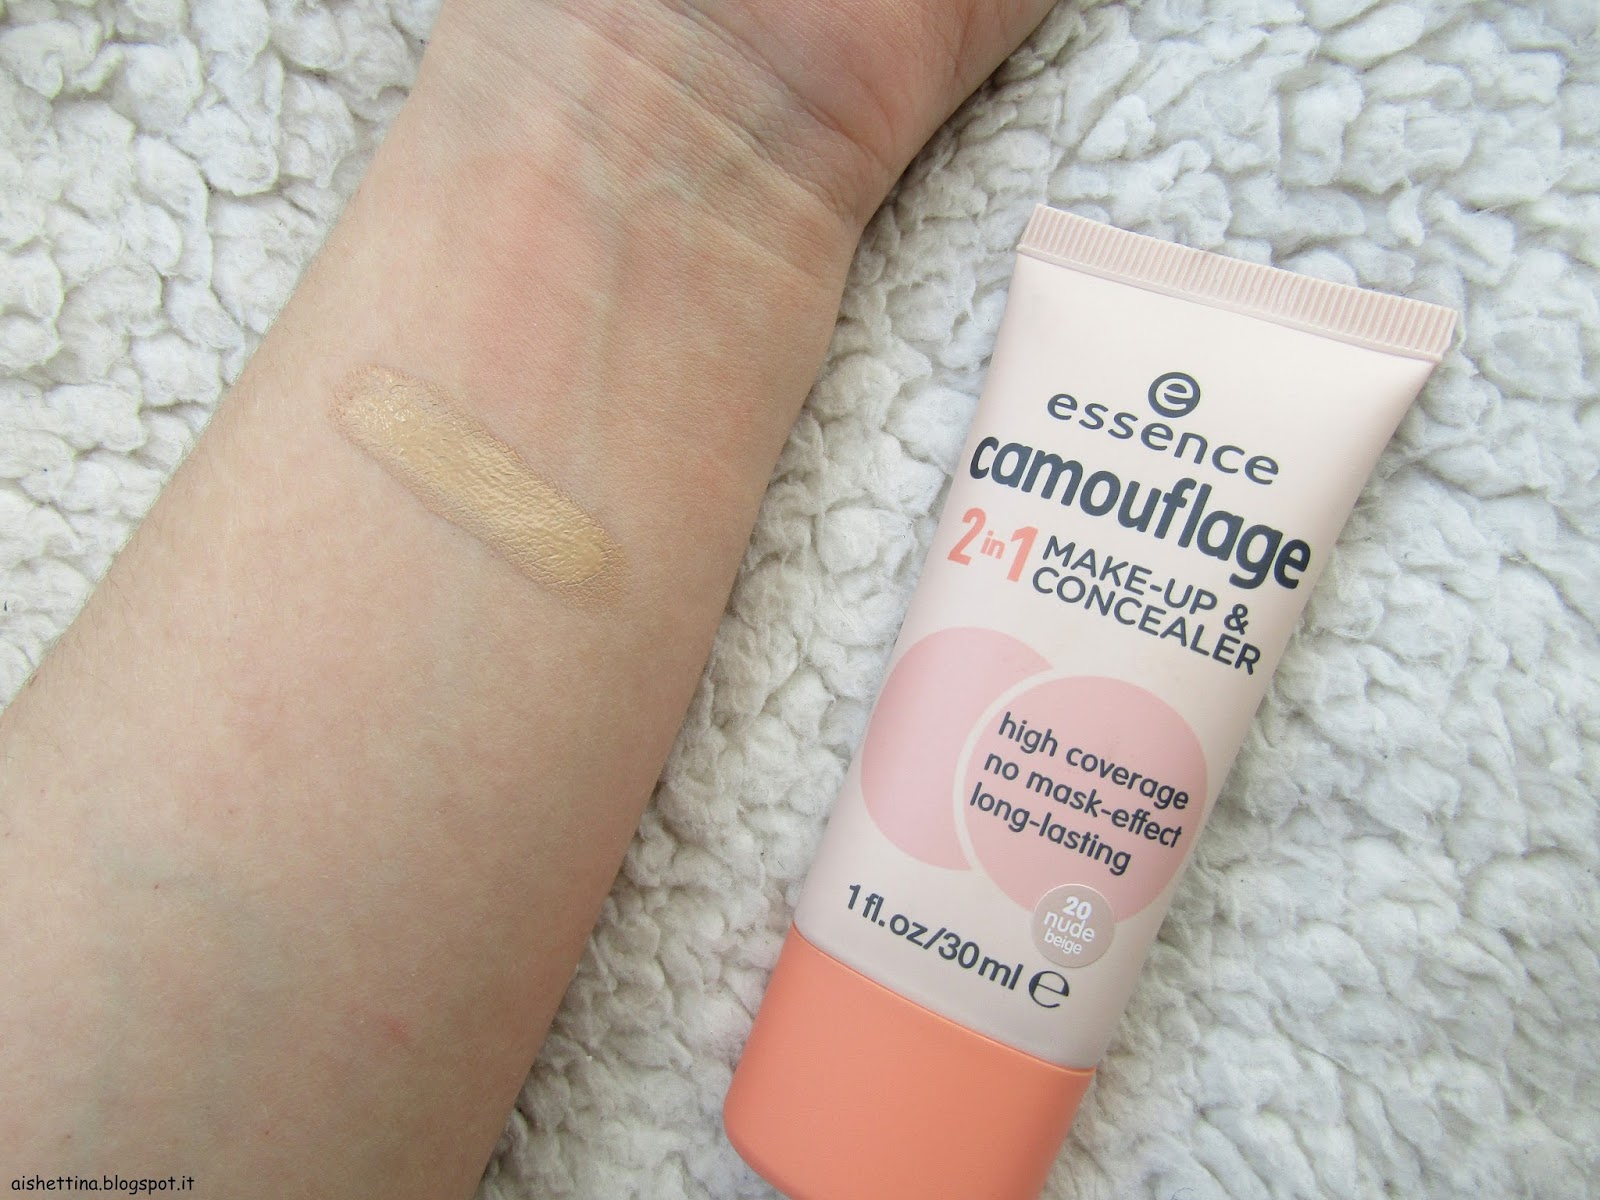 REVIEW Essence camouflage 2 in 1 makeup & concealer